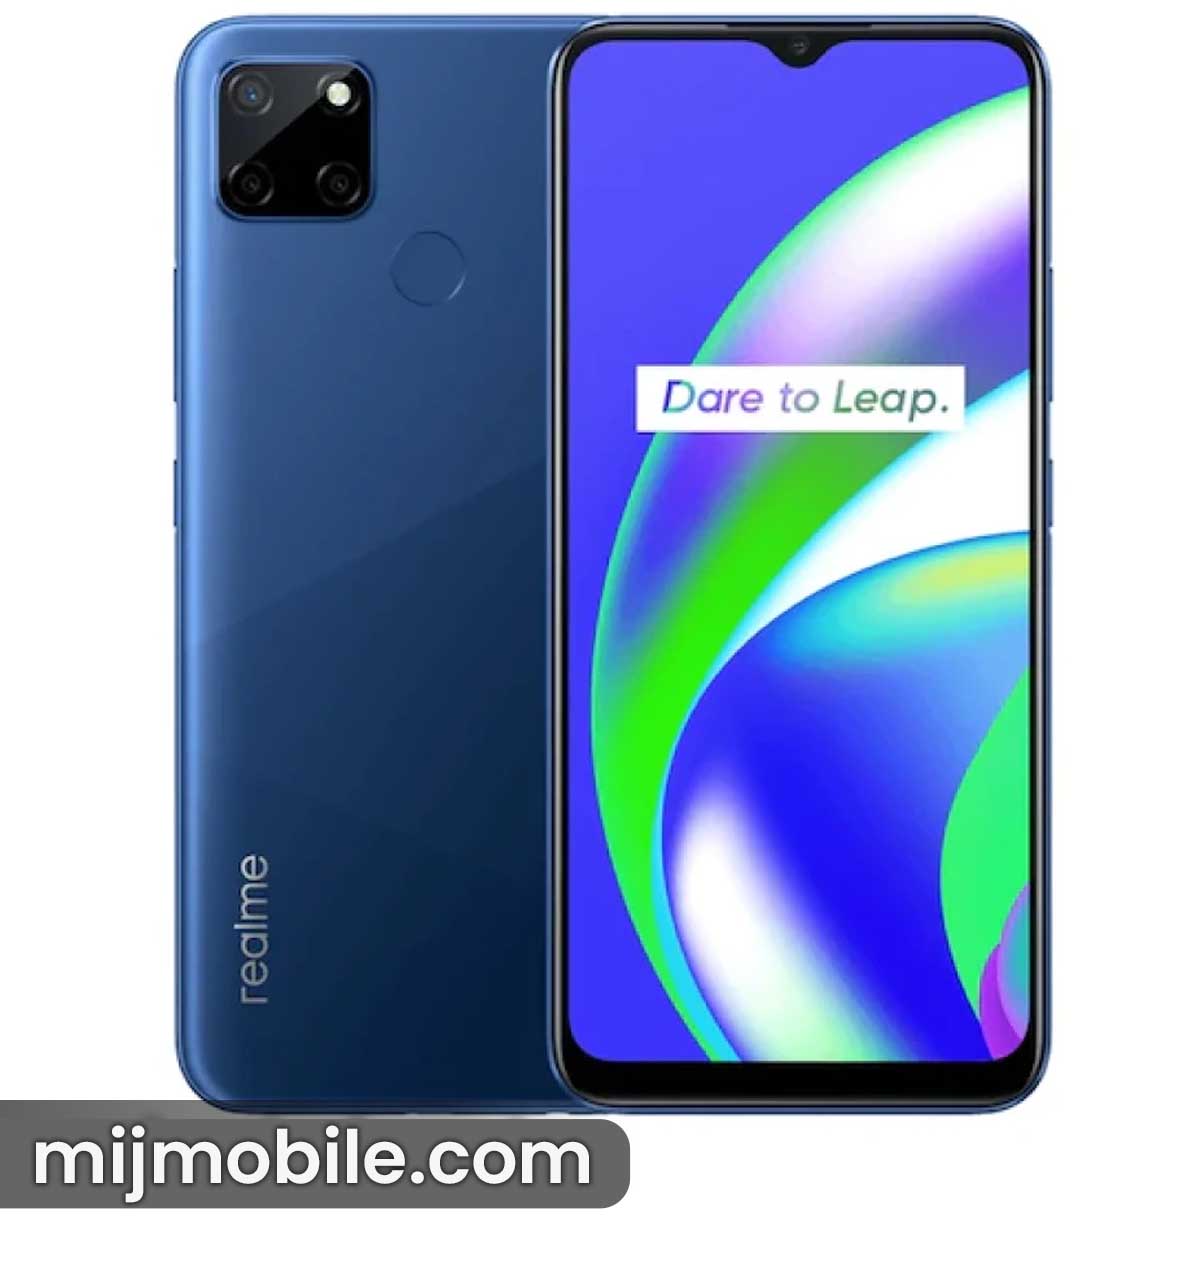 Realme C12 Price in Pakistan & Specifications Realme C12 Price in Pakistan is only 19,999.